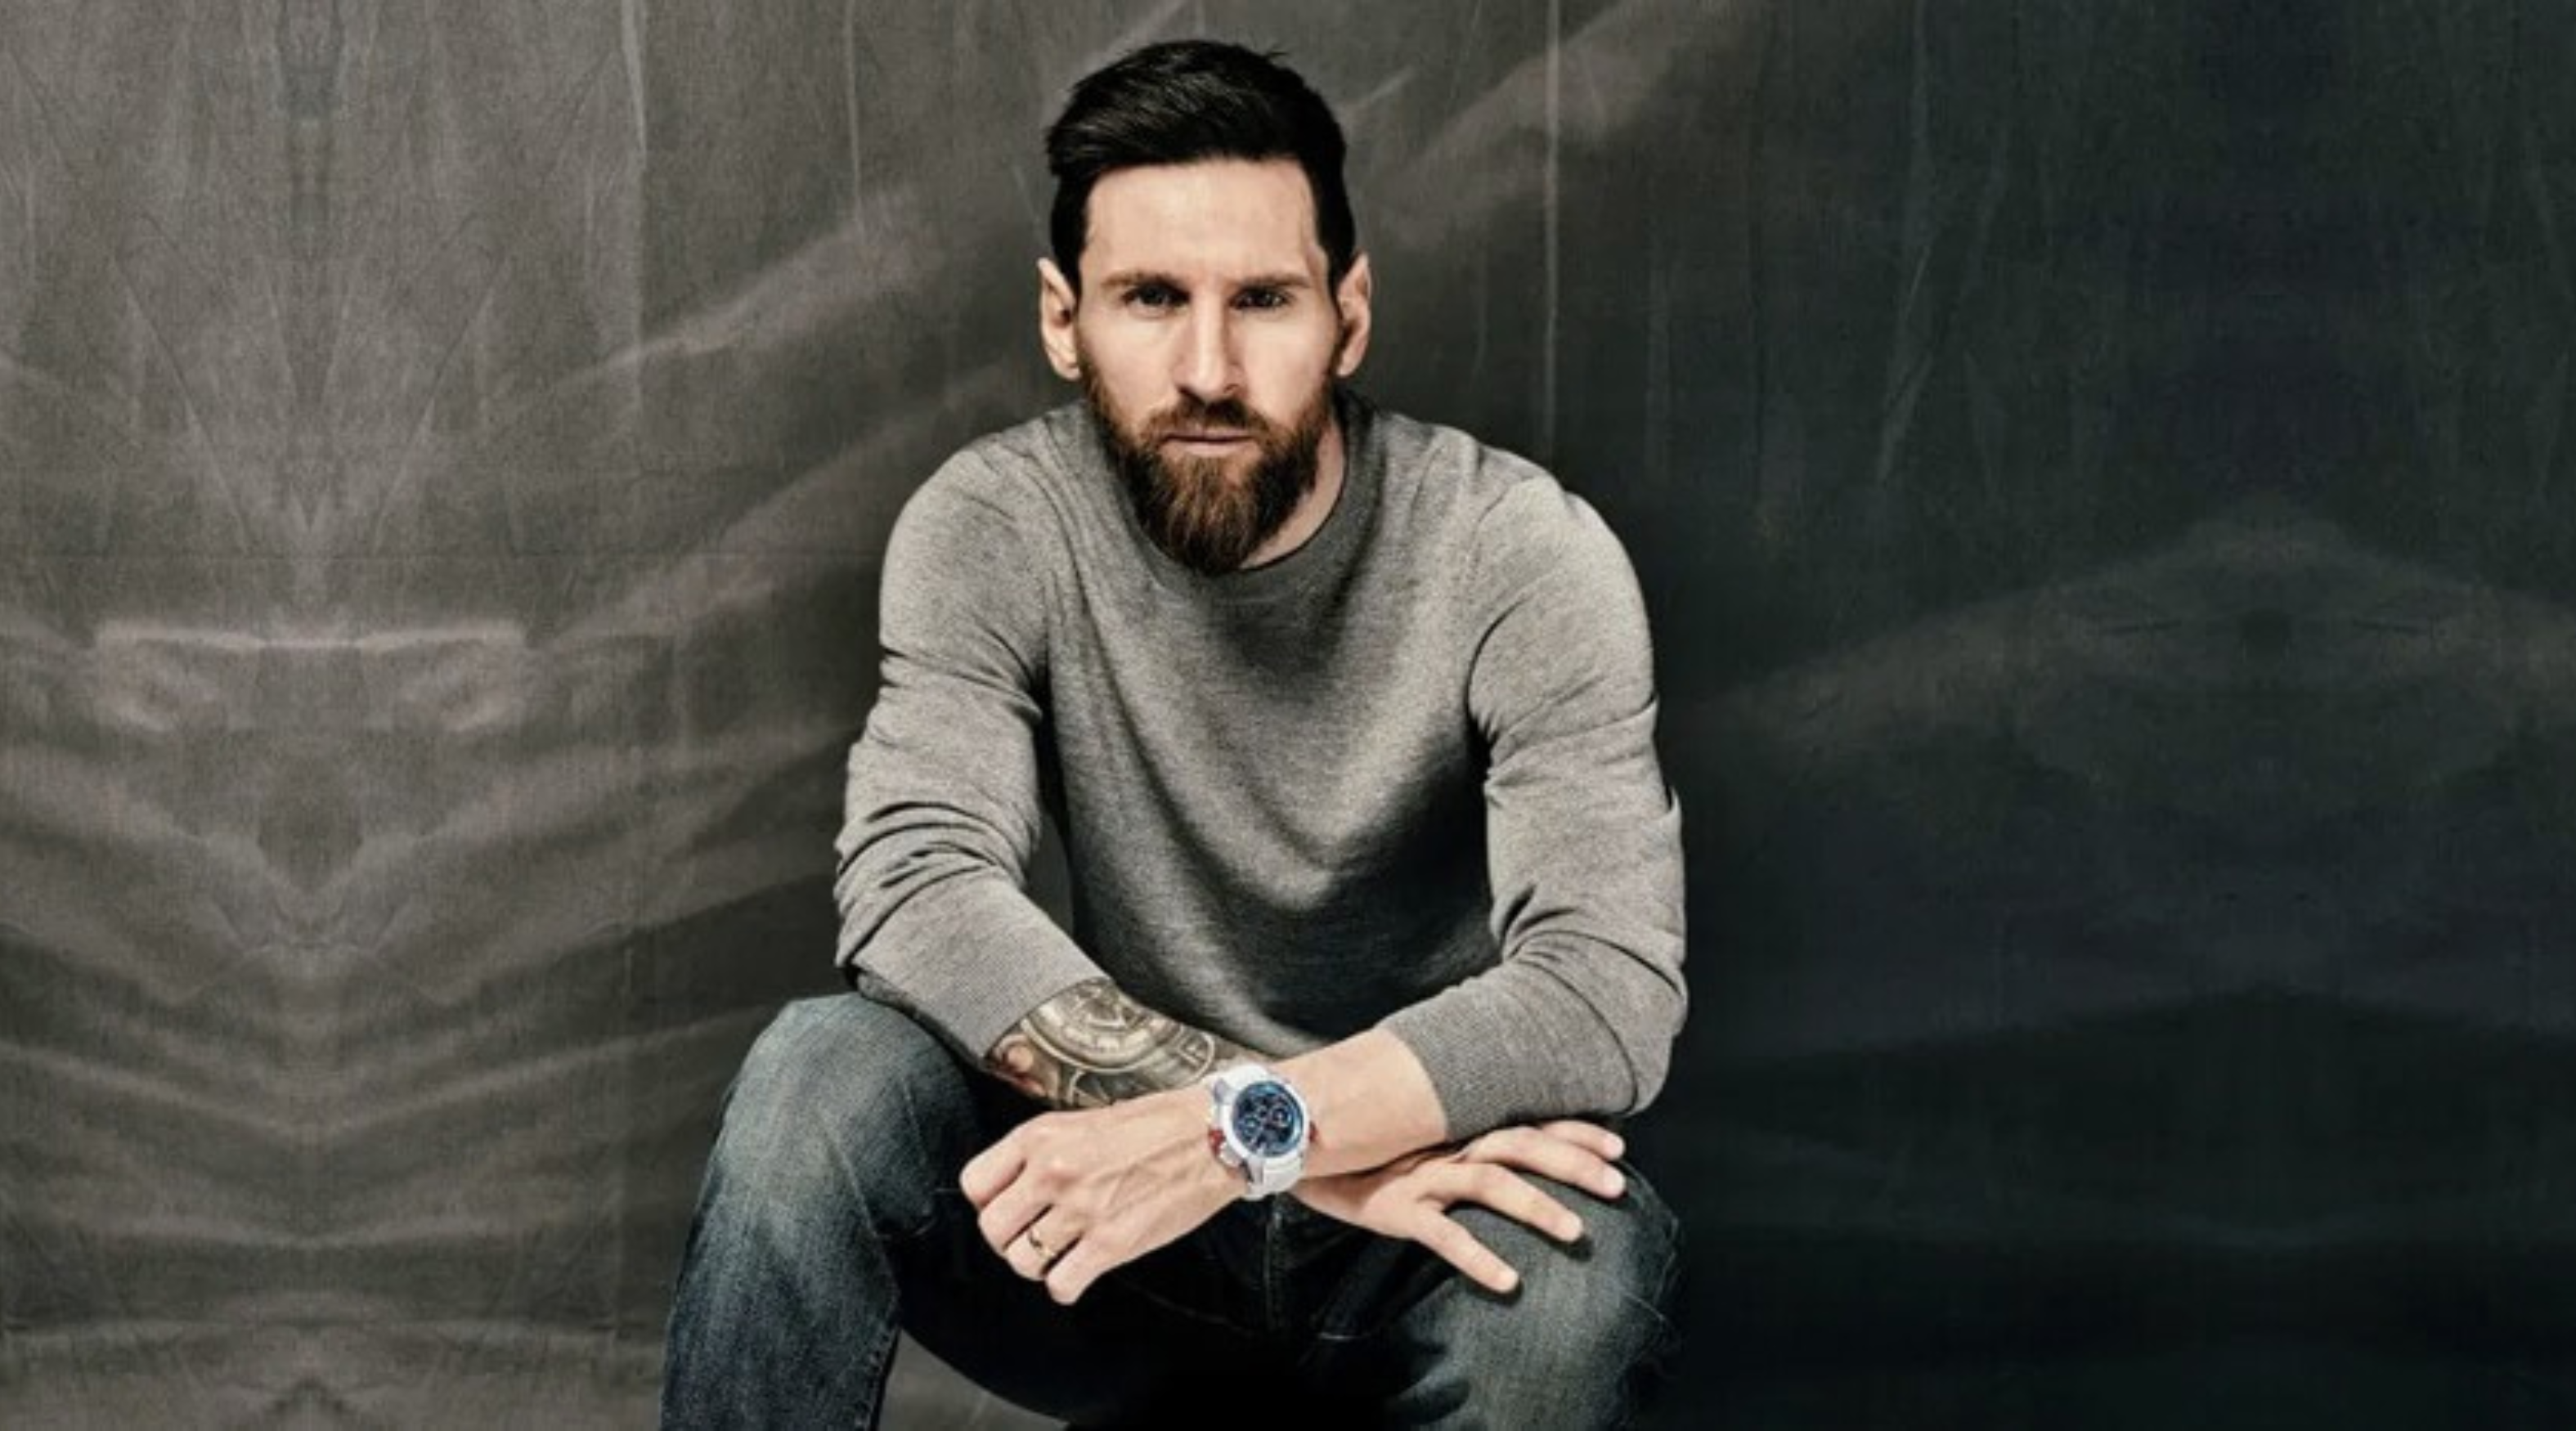 Article: Lionel Messi and the World Cup Champions' Watch Collection